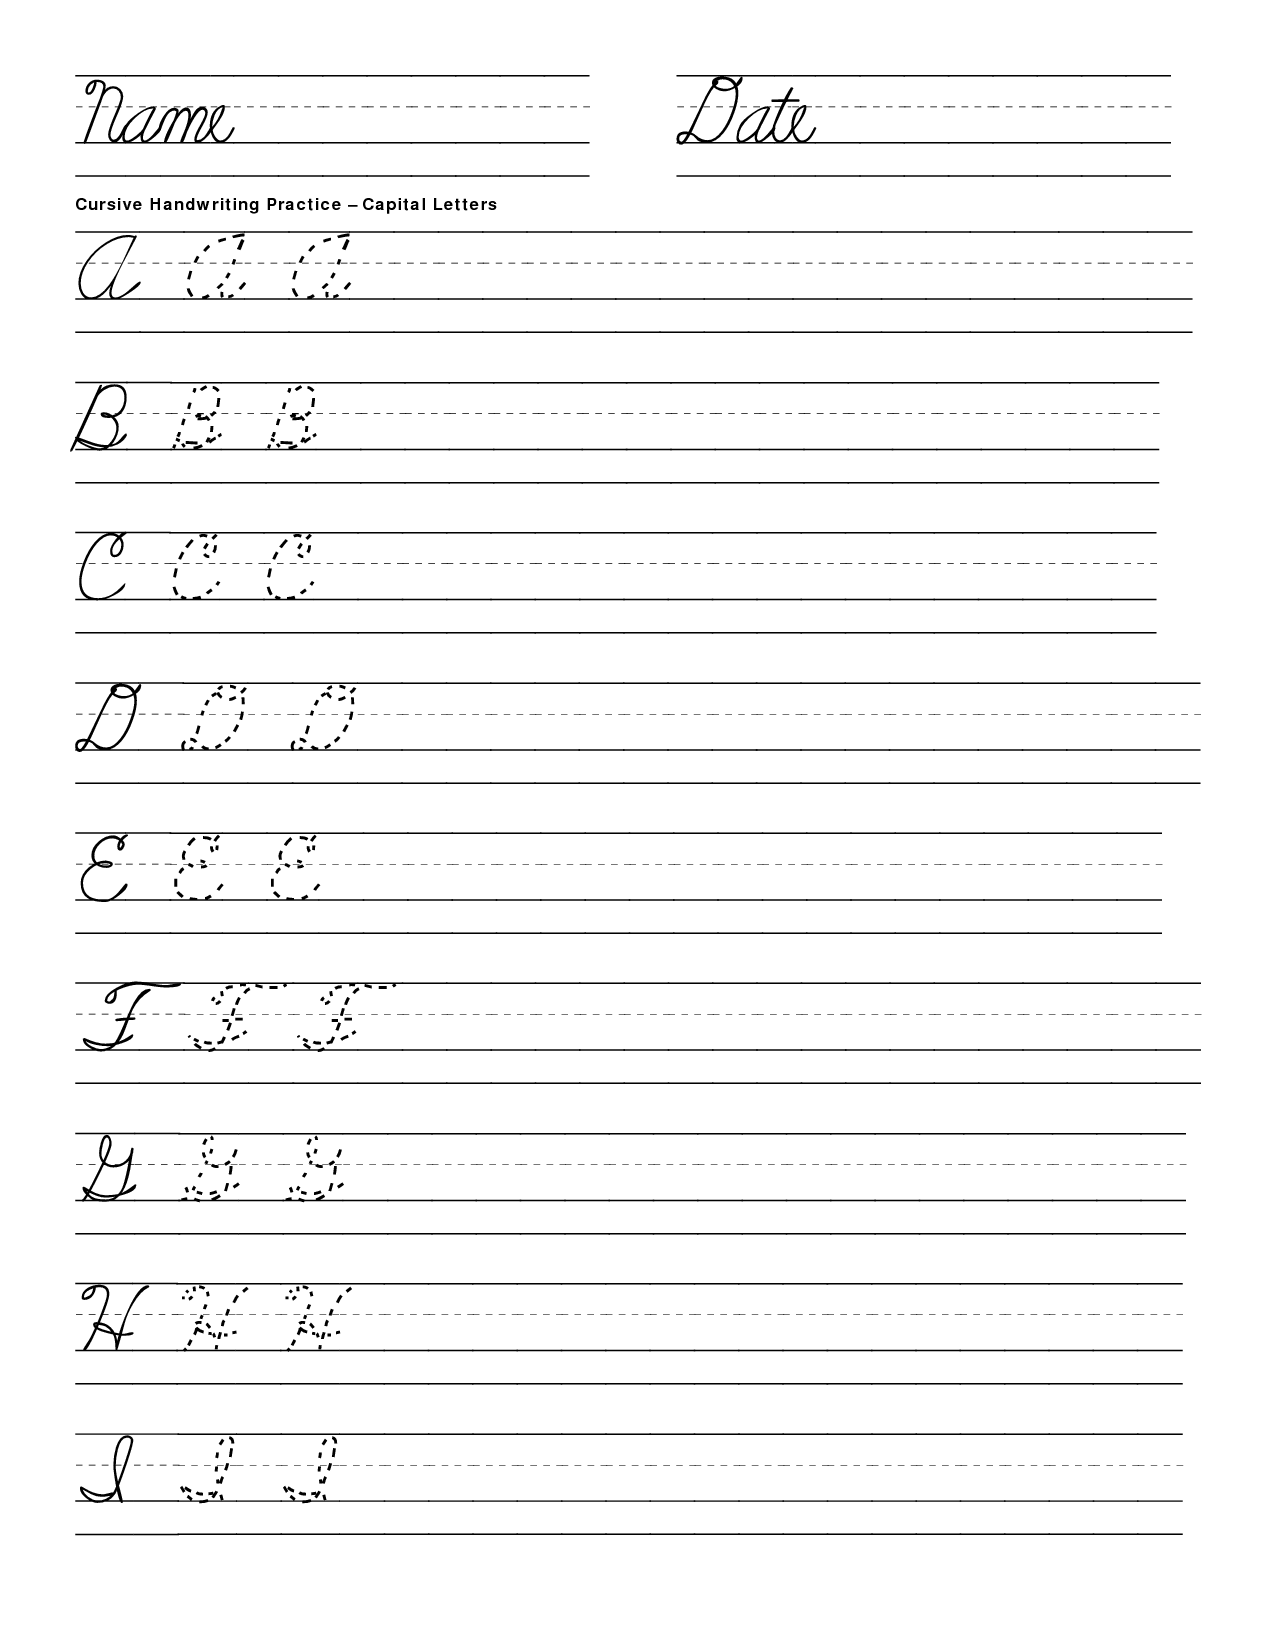 5-best-images-of-printable-cursive-handwriting-practice-sheets